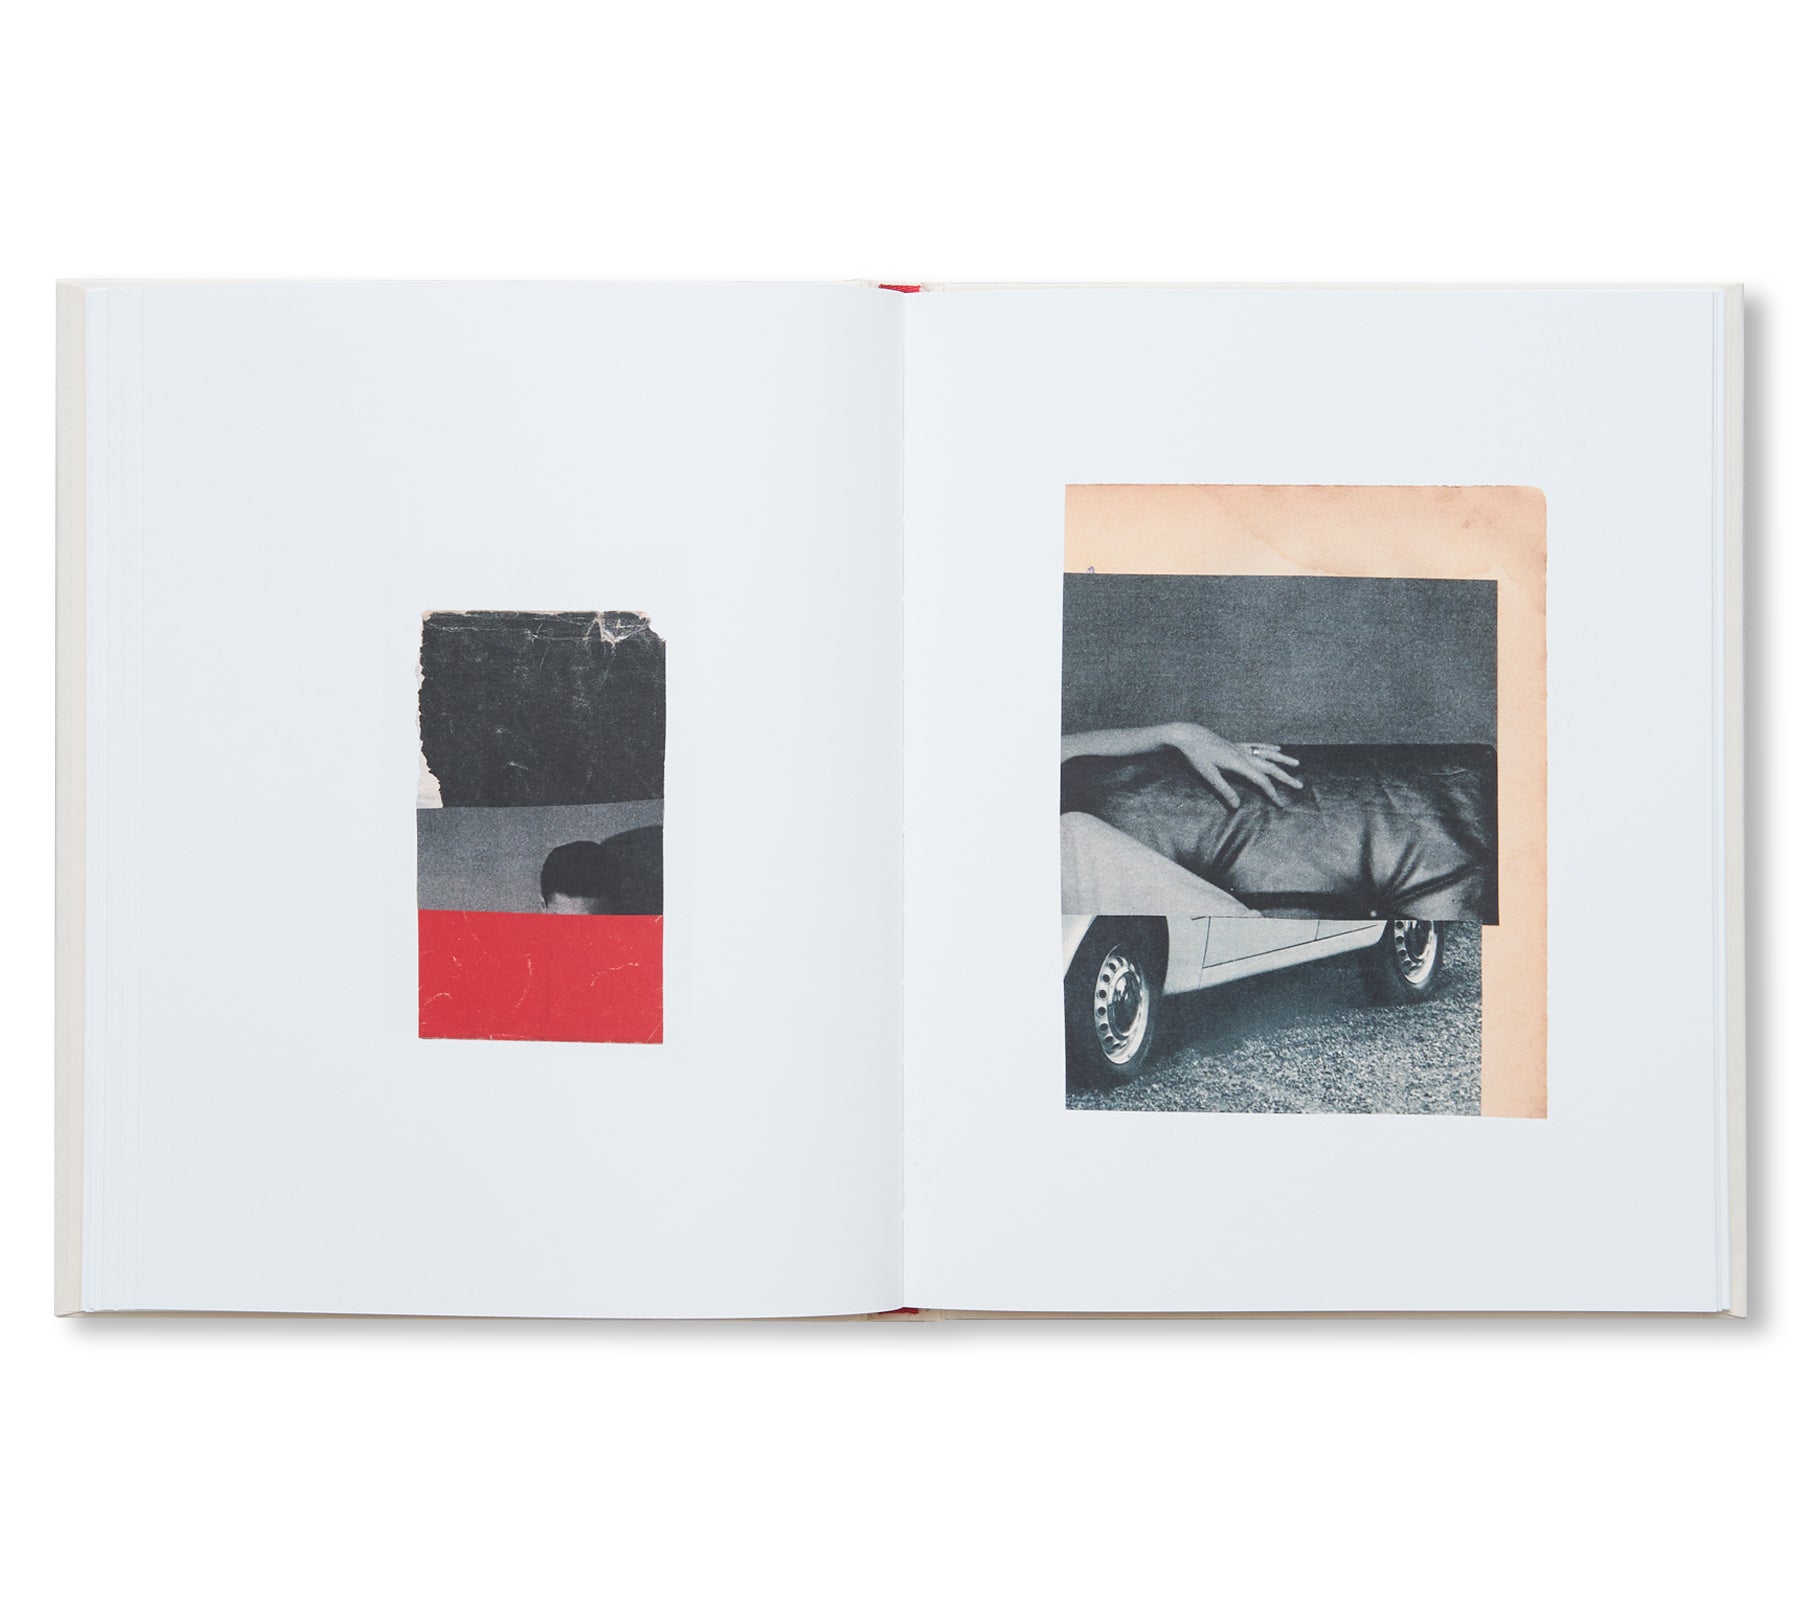 WHY I HATE CARS by Katrien De Blauwer [SPECIAL EDITION]